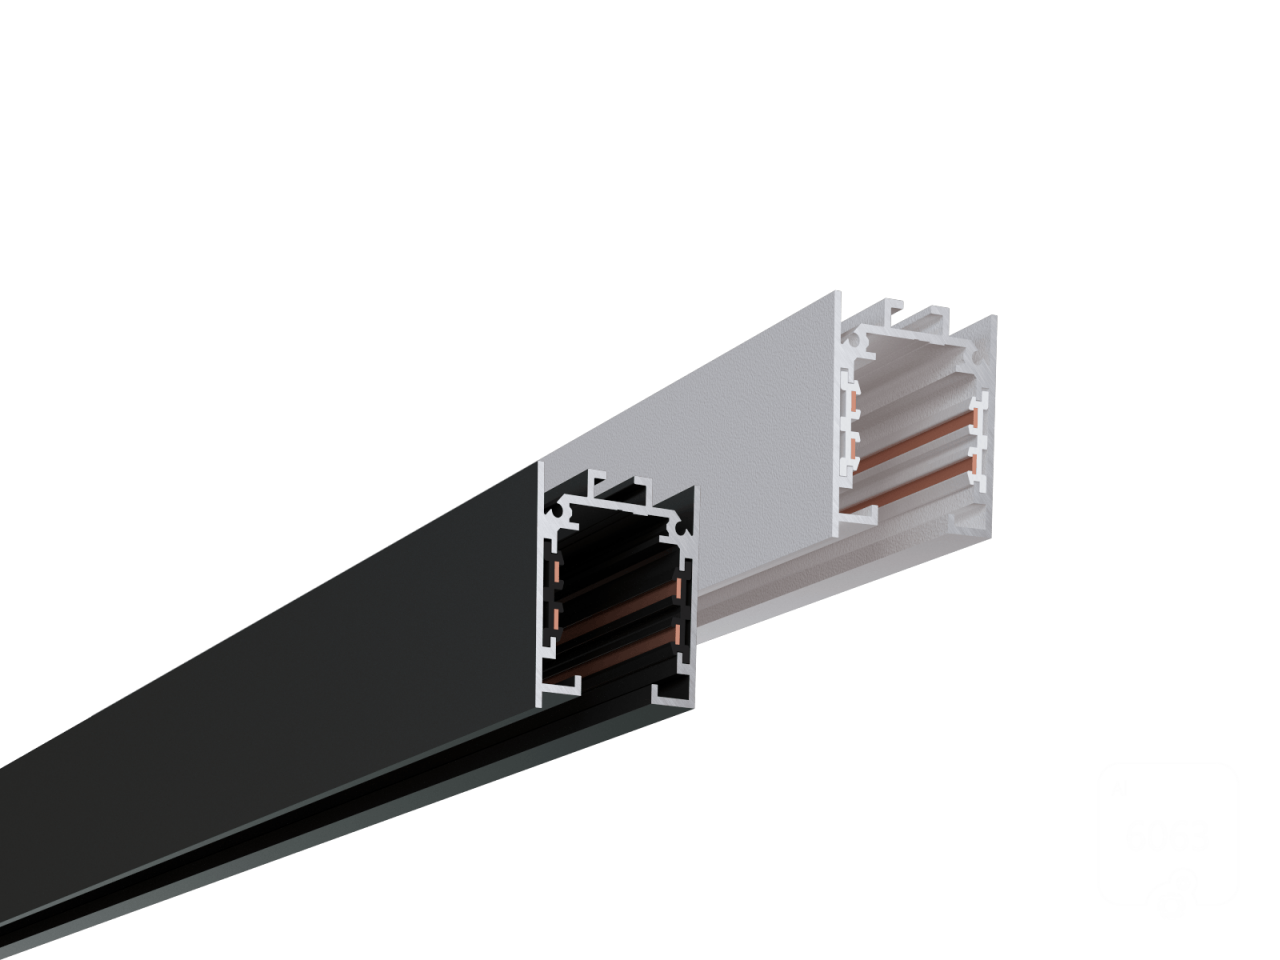 TR4 3-phase track, for 4 wires.